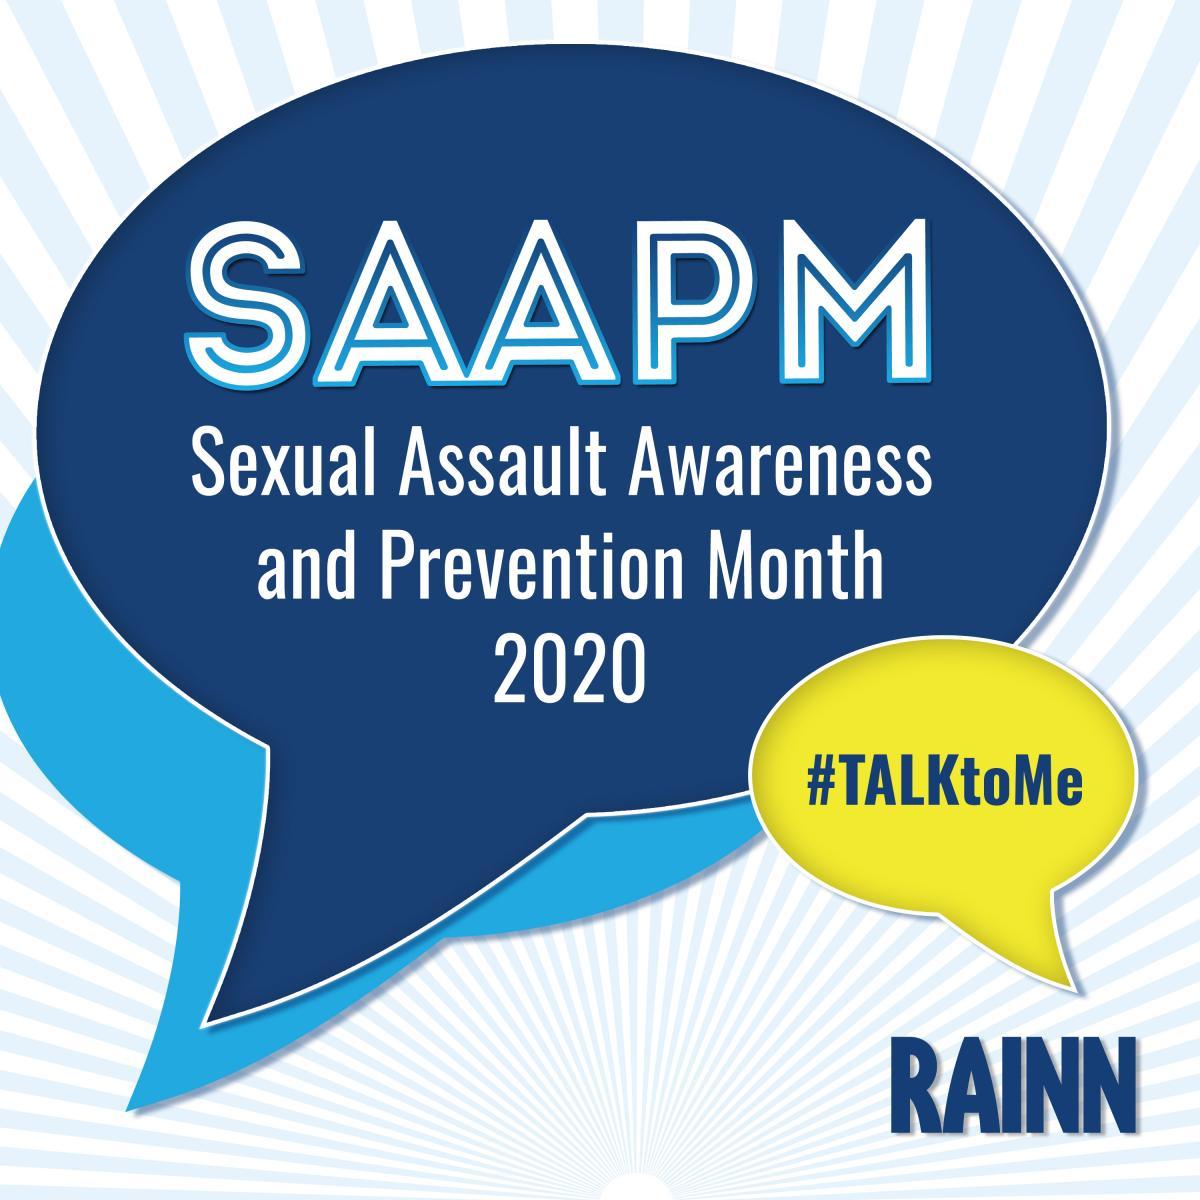 April is Sexual Assault Awareness & Prevention Month. If you or someone you know has been sexually assaulted, help is available. Call the National Sexual Assault Hotline at 800.656.HOPE or visit online.rainn.org to get help.
To get involved in SAAPM...